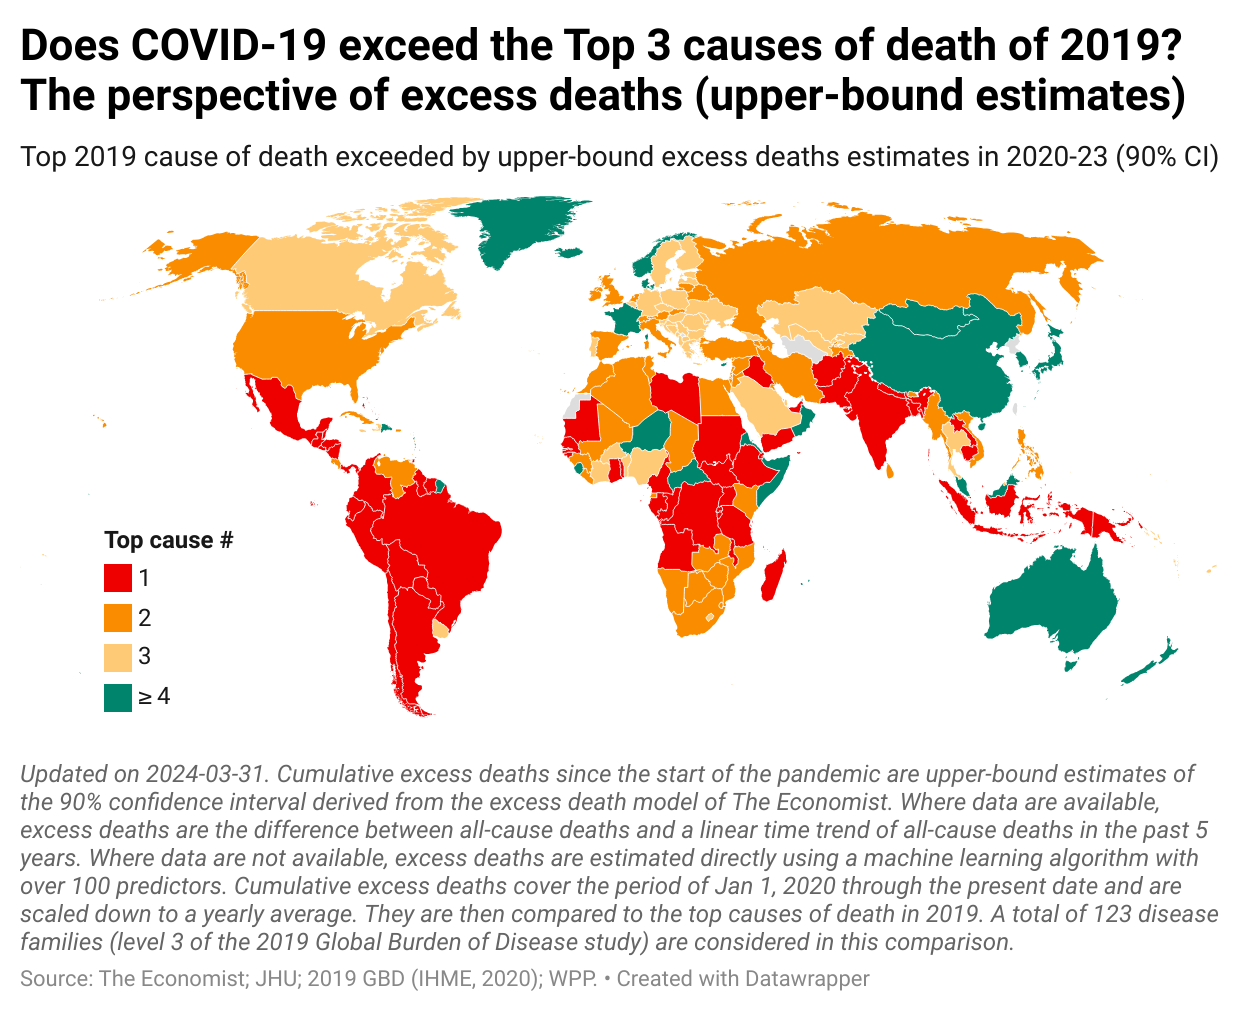 Pandemic severity based on upper-bound estimates of excess mortality